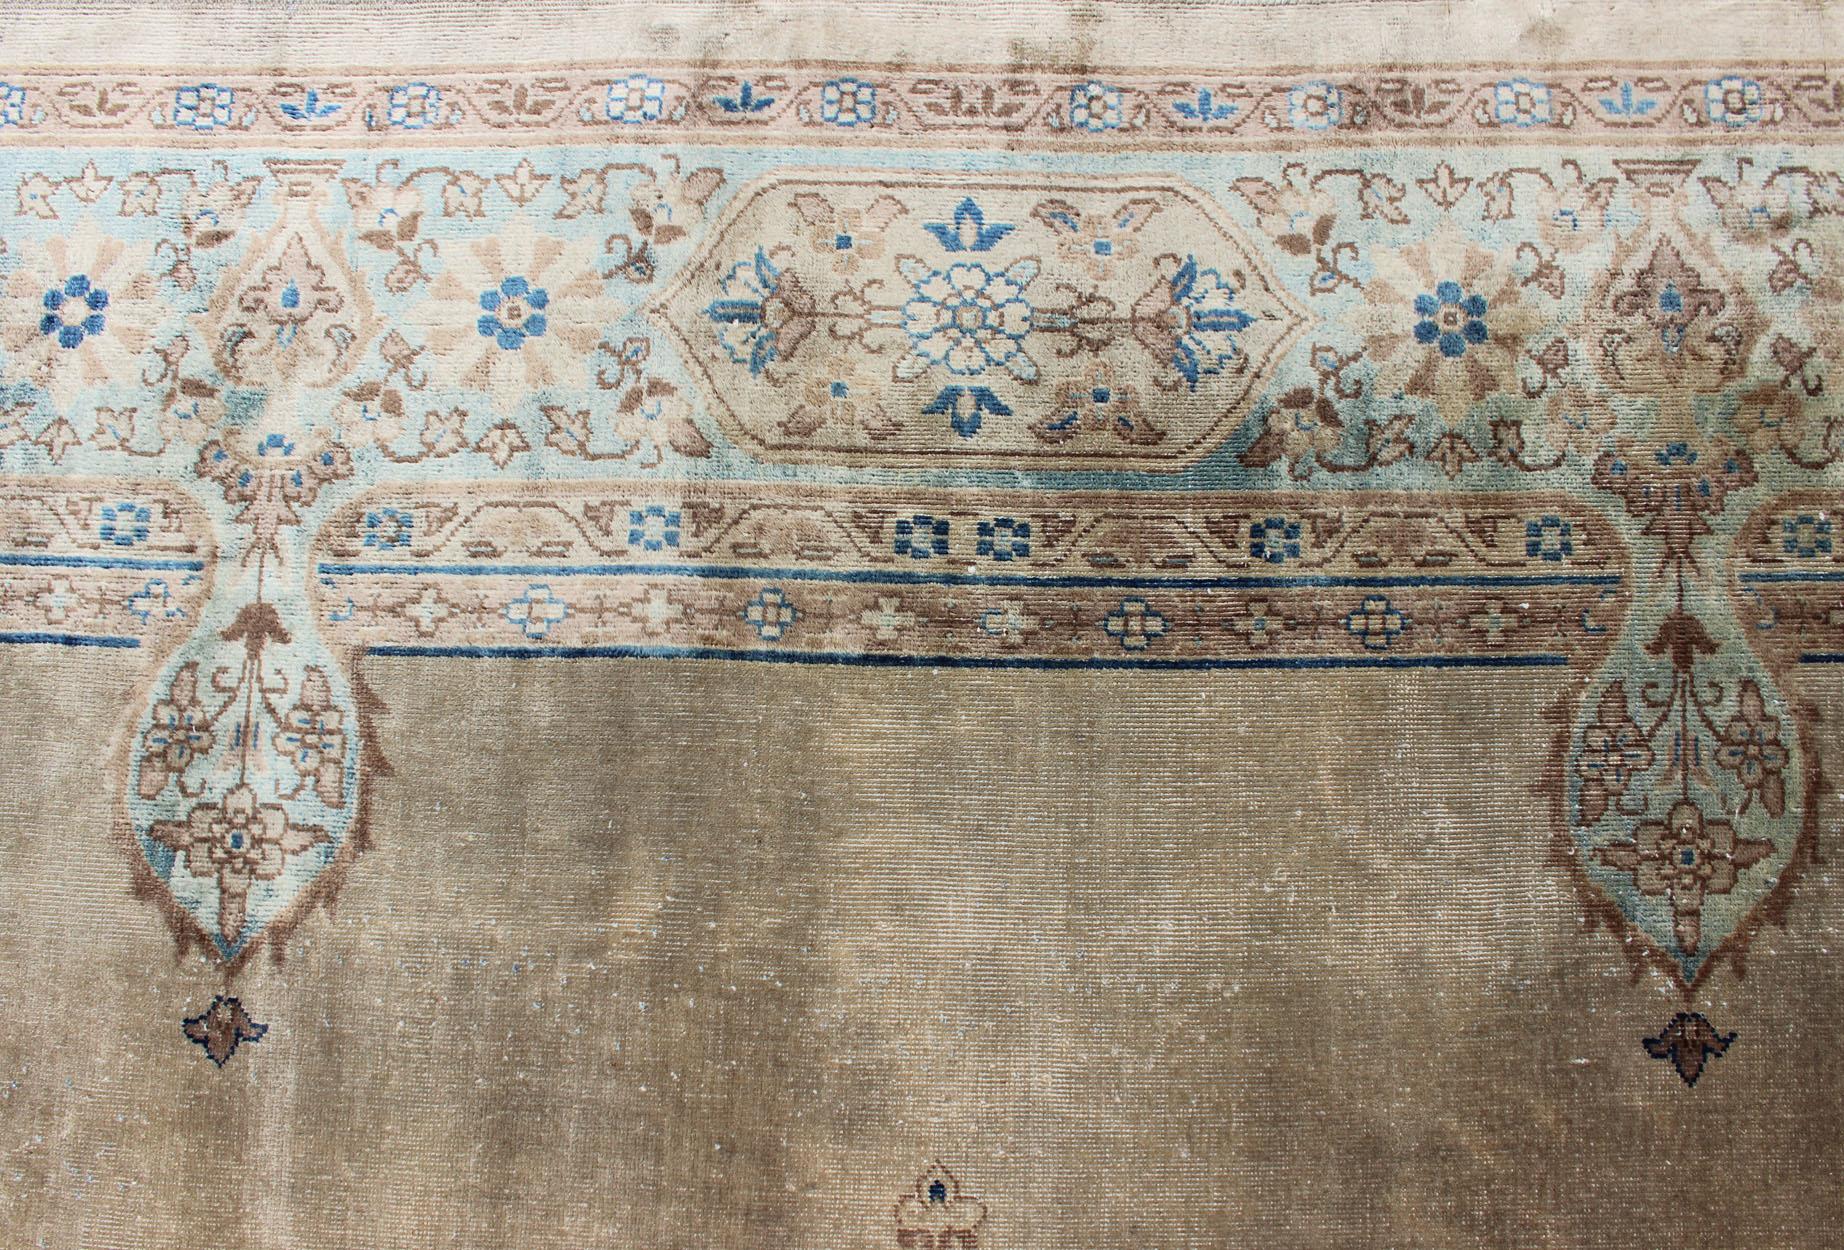 Antique Hand Knotted Amritsar Carpet in Taupe, Light Brown and Blue Accent's 10